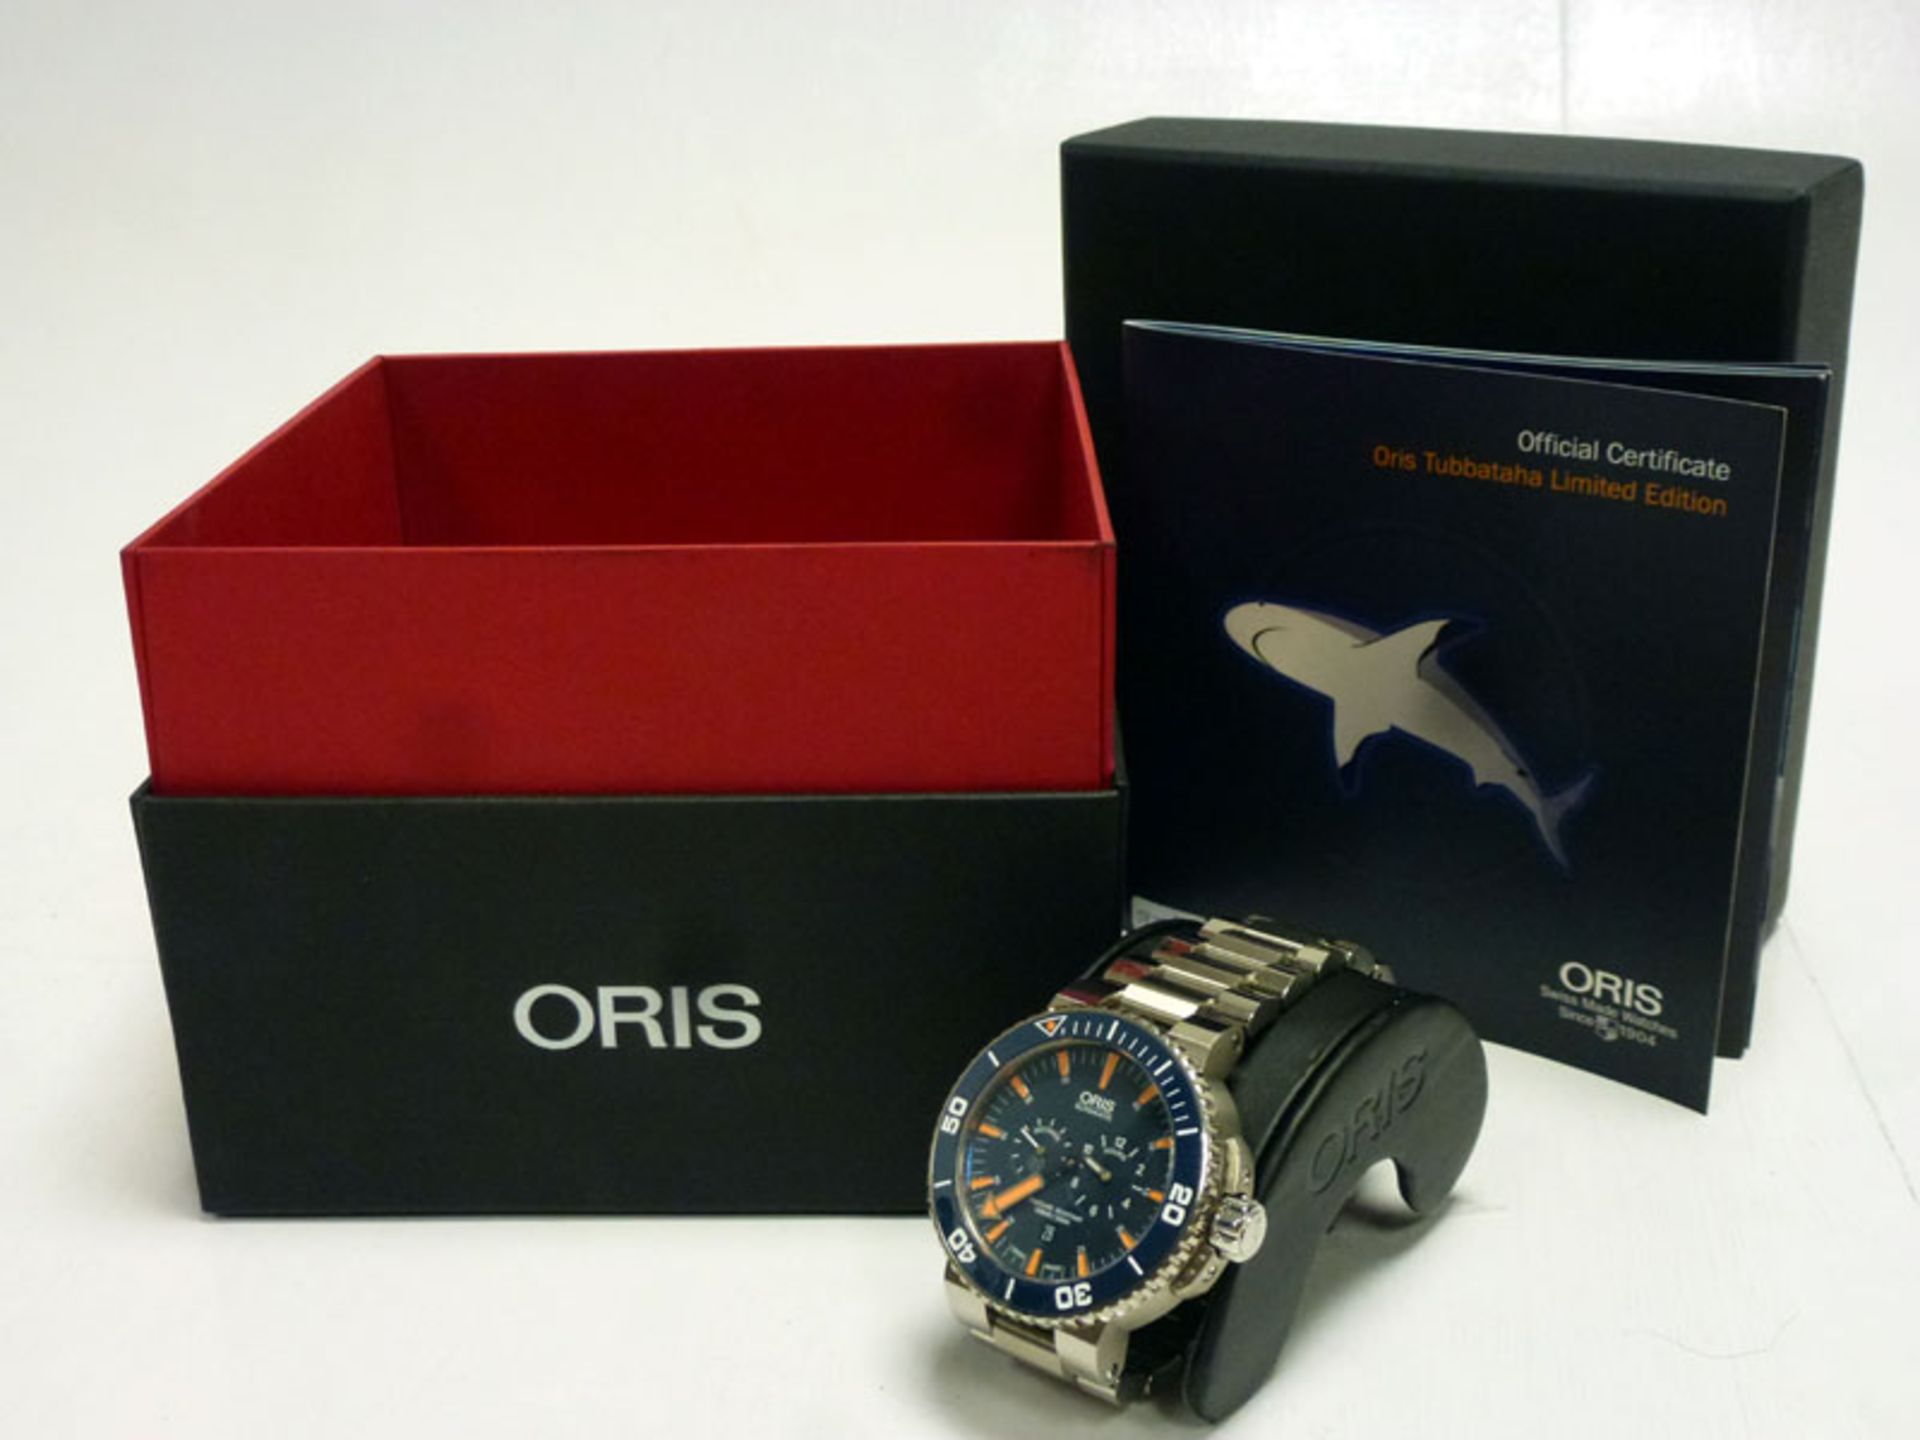 Oris 749 calibre automatic movement with bi-directional red rotor, 38-hour power reserve, date